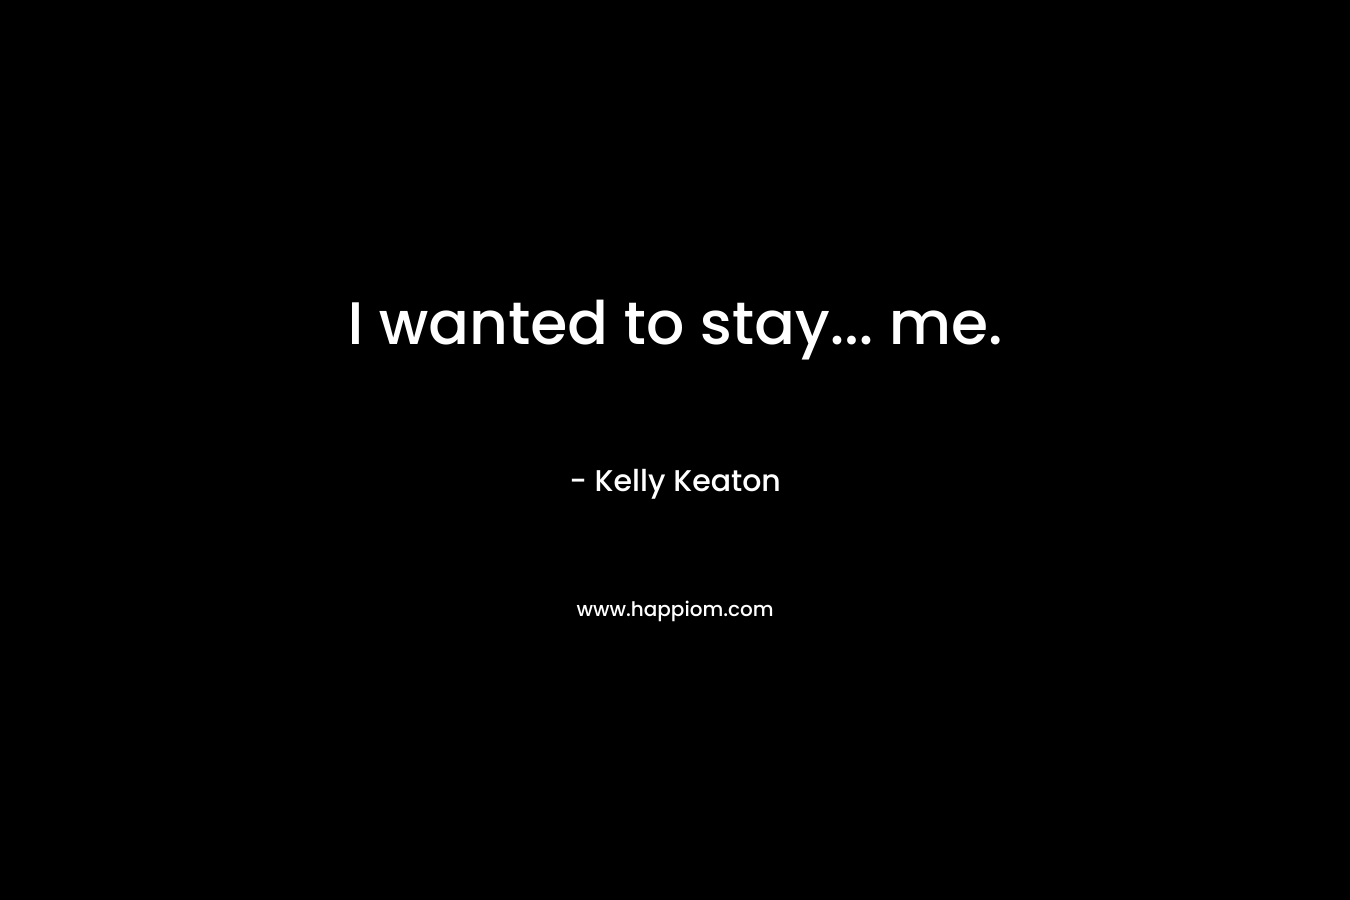 I wanted to stay... me.